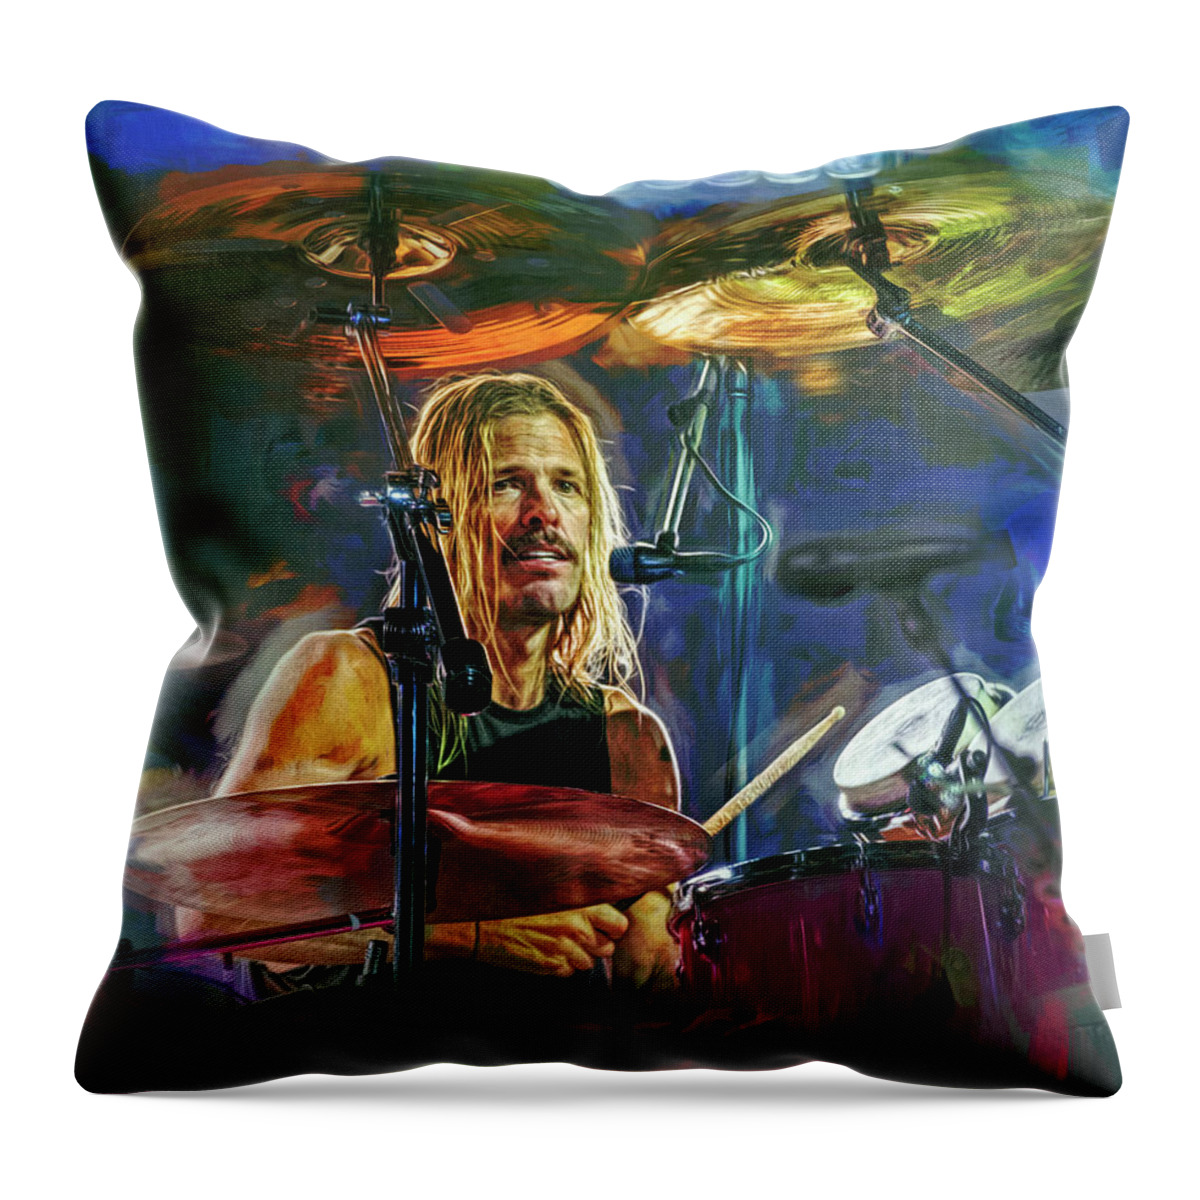 Foo Fighters Throw Pillow featuring the mixed media Taylor Hawkins Foo Fighters by Mal Bray